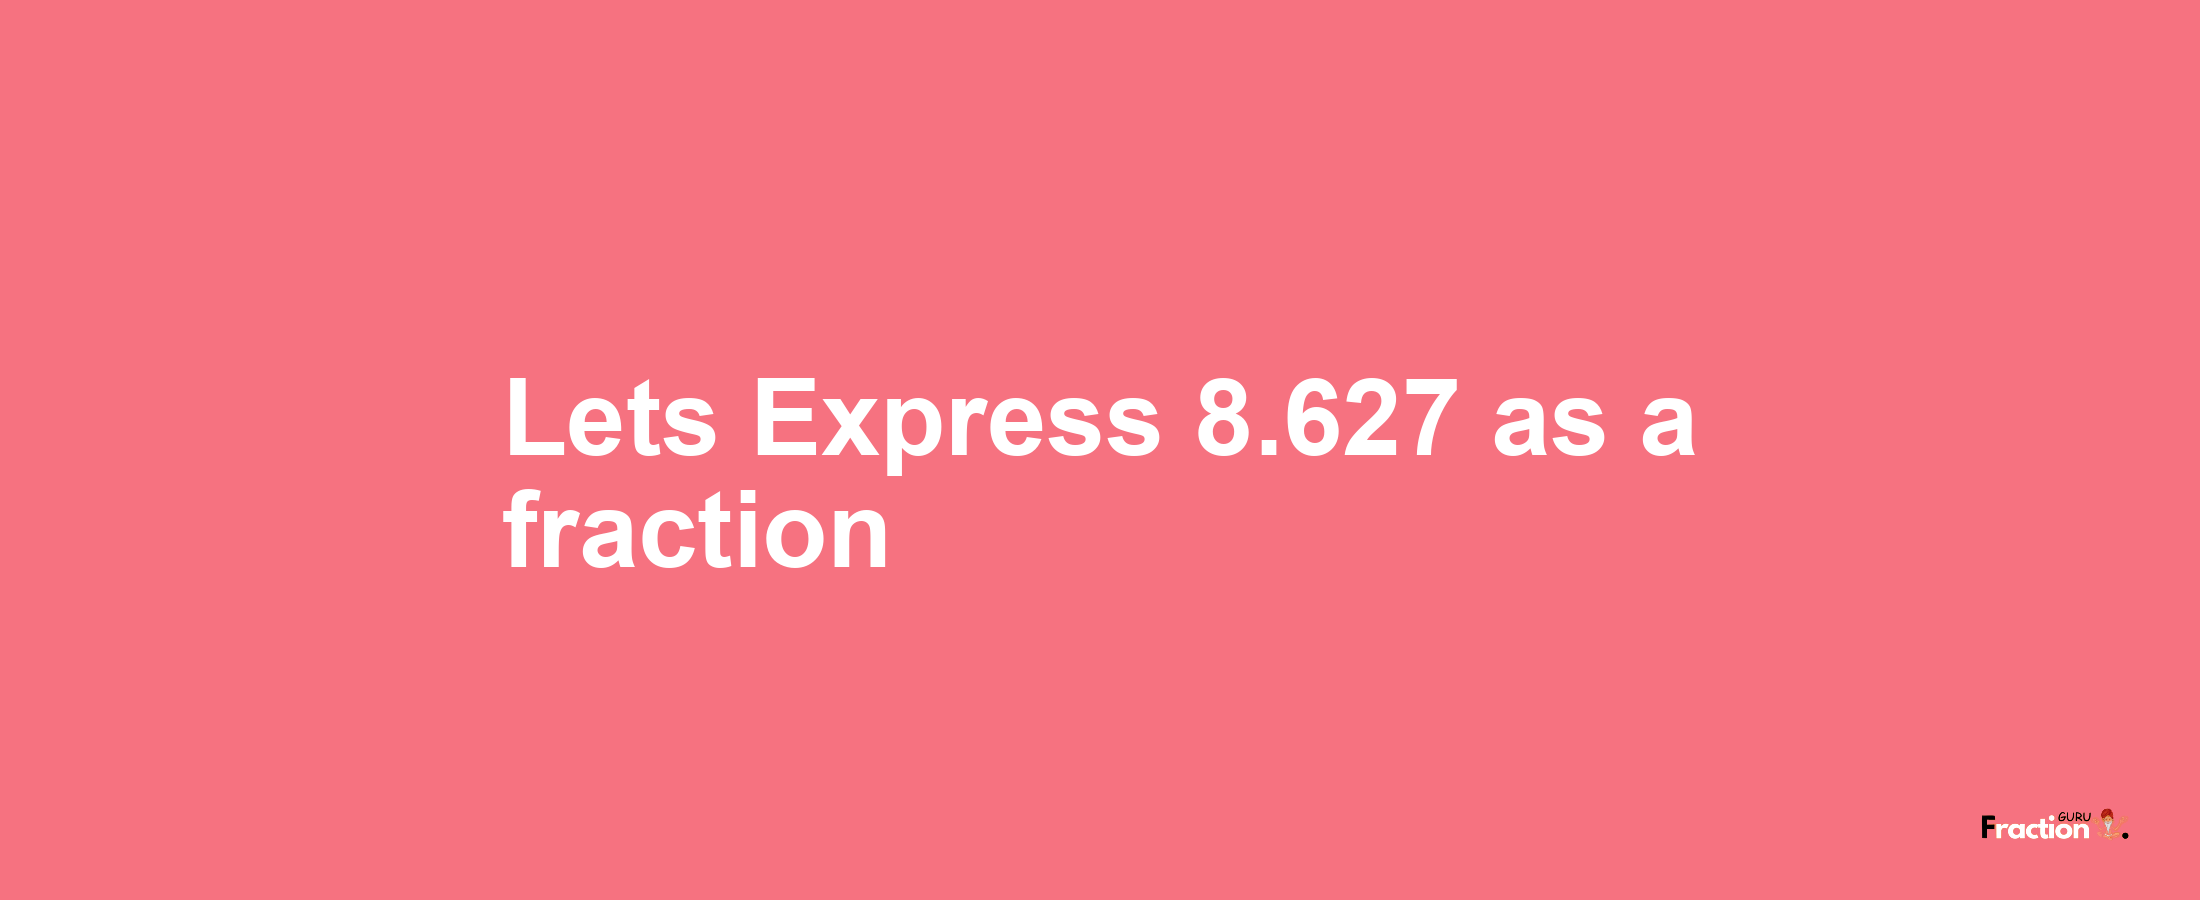 Lets Express 8.627 as afraction